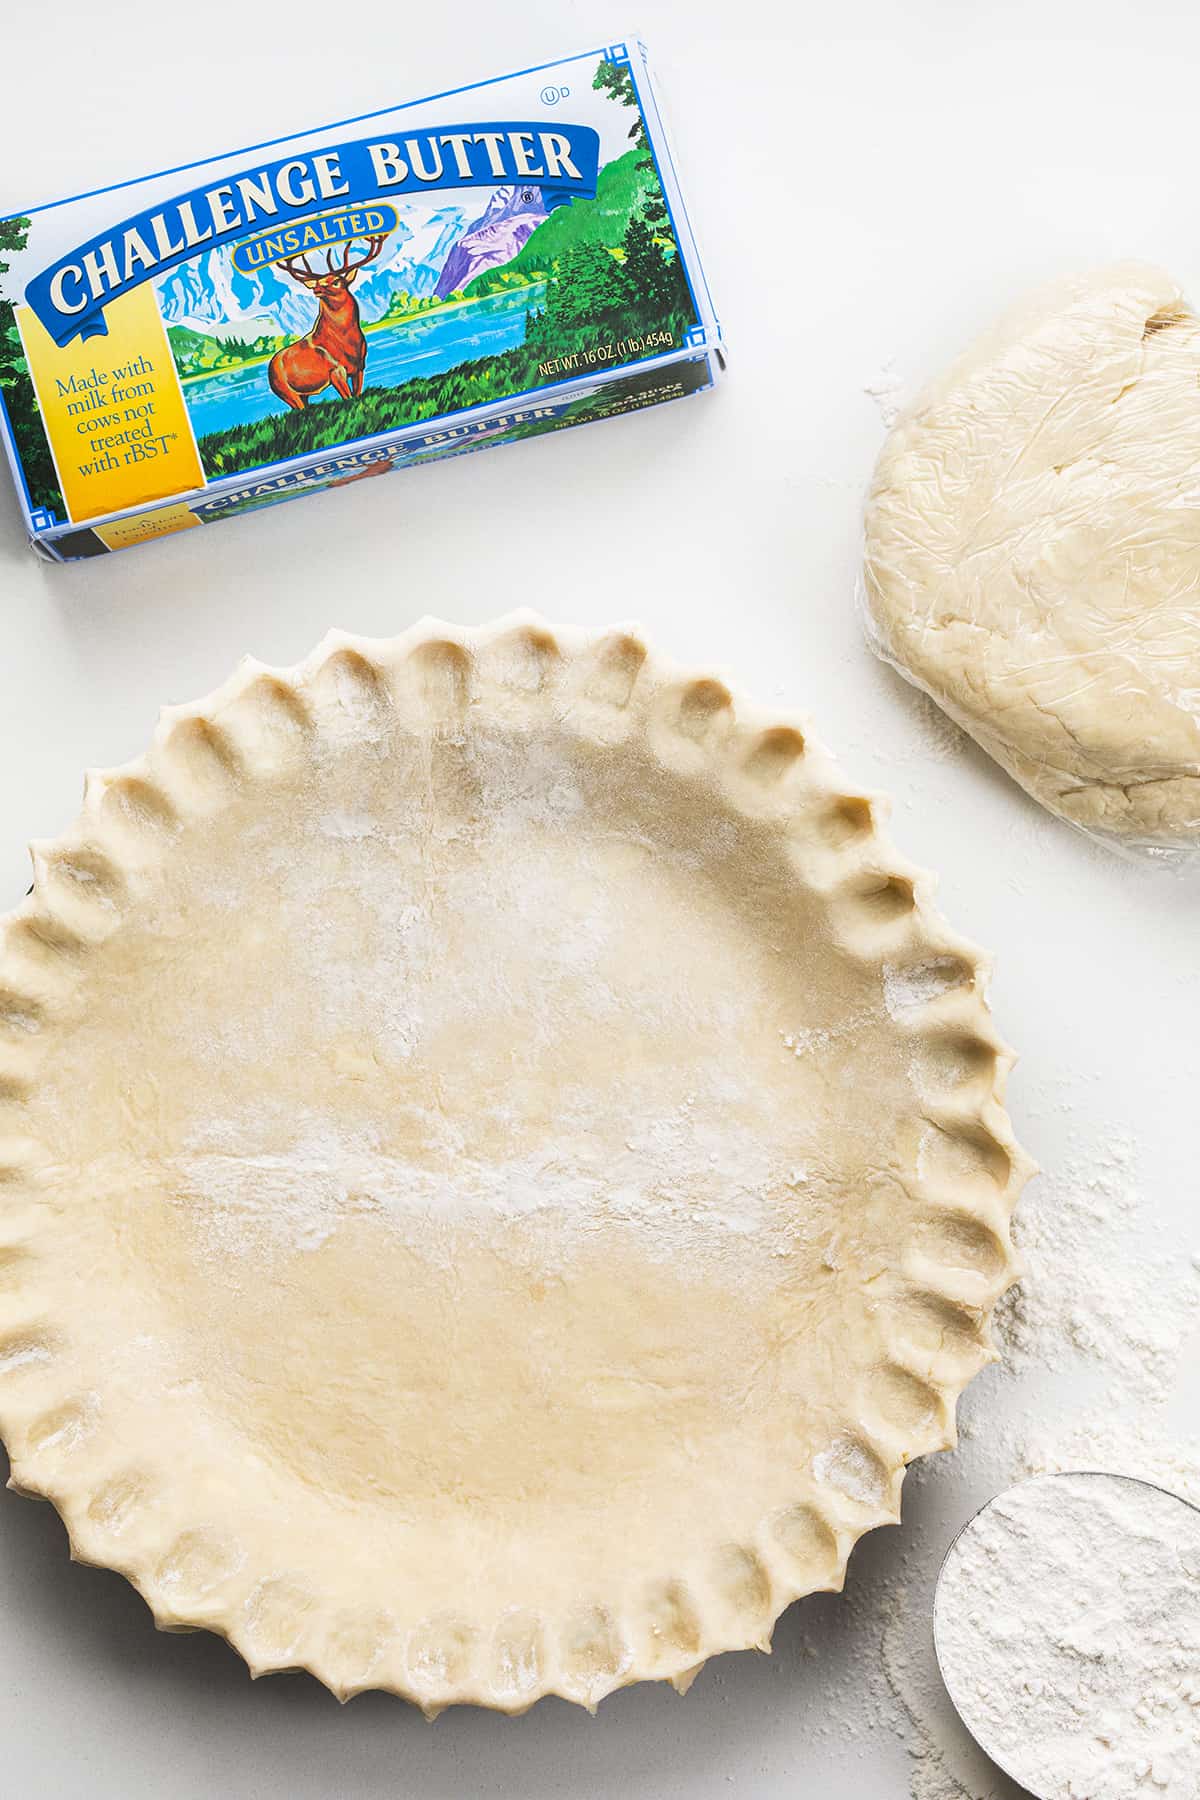 Pie Crust in a Pie that has Been Crimped Before Baking Next to Flour, Butter, and an Additional Pie Crust in Plastic Wrap. 